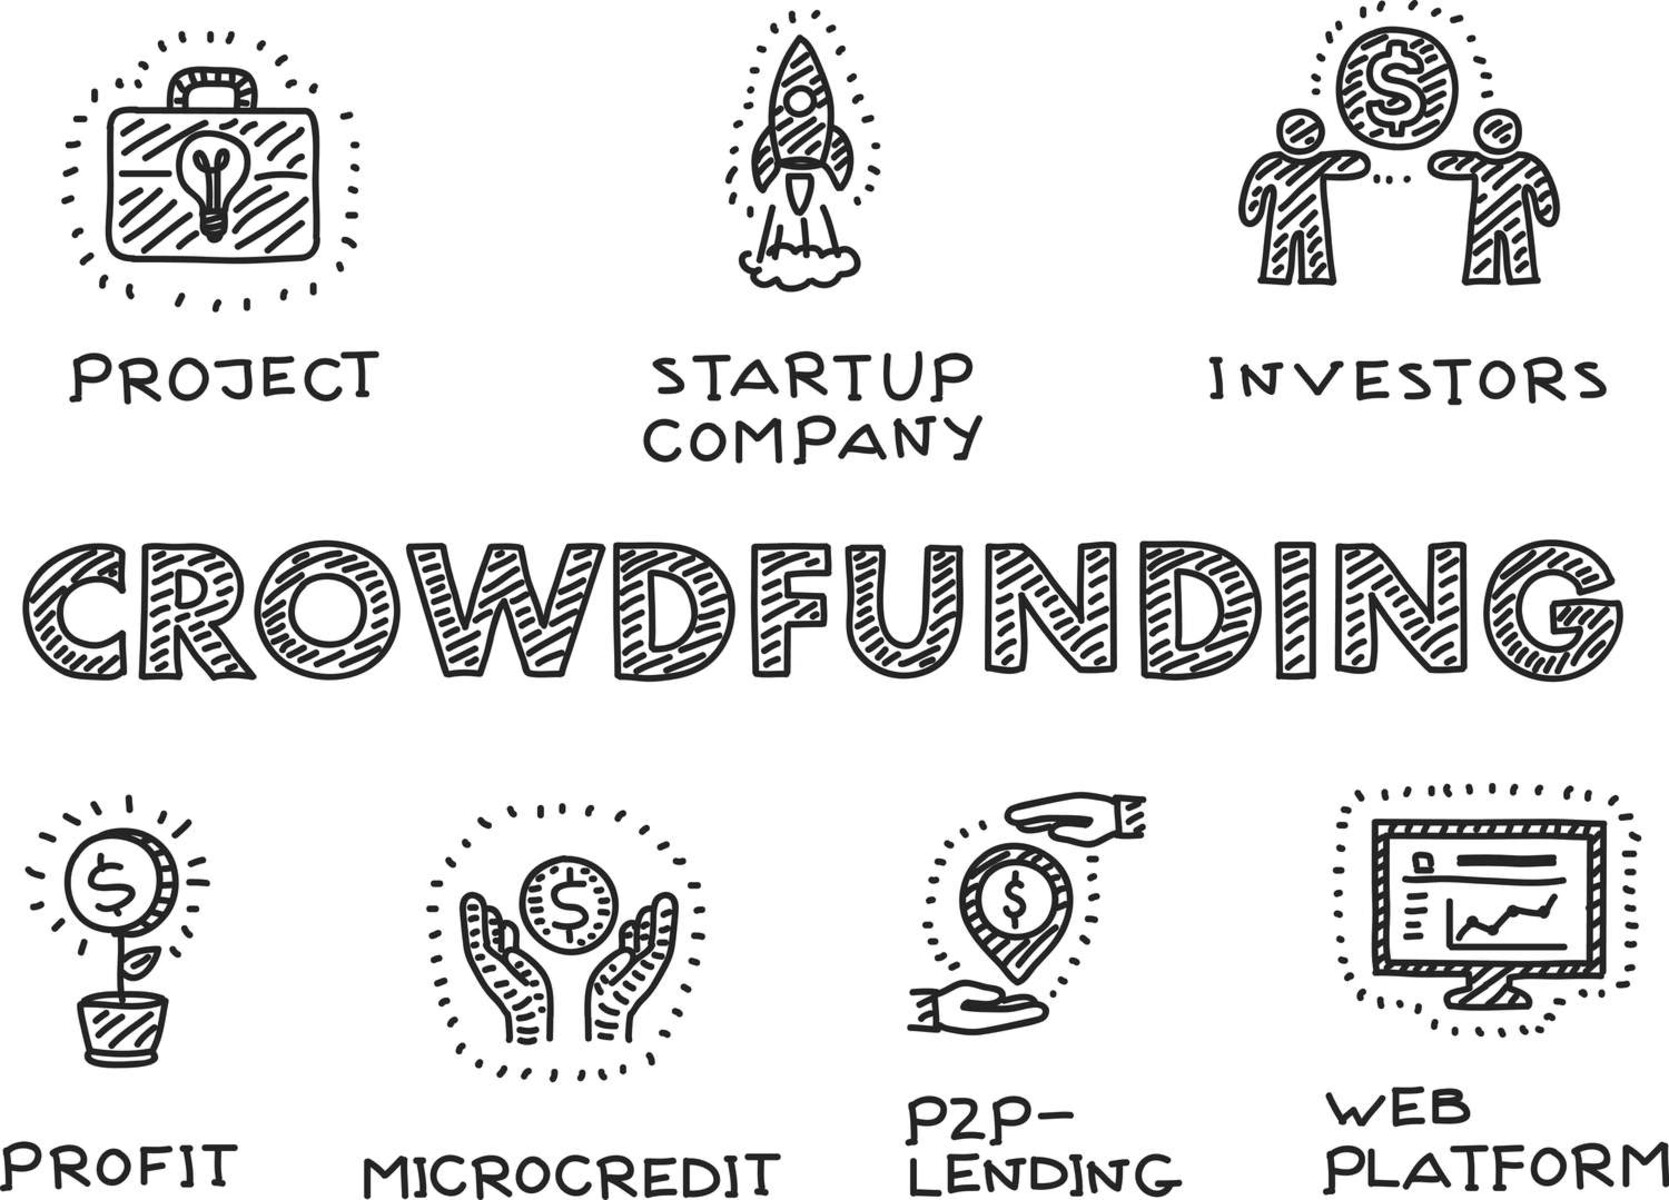 What Are The Types Of Crowdfunding